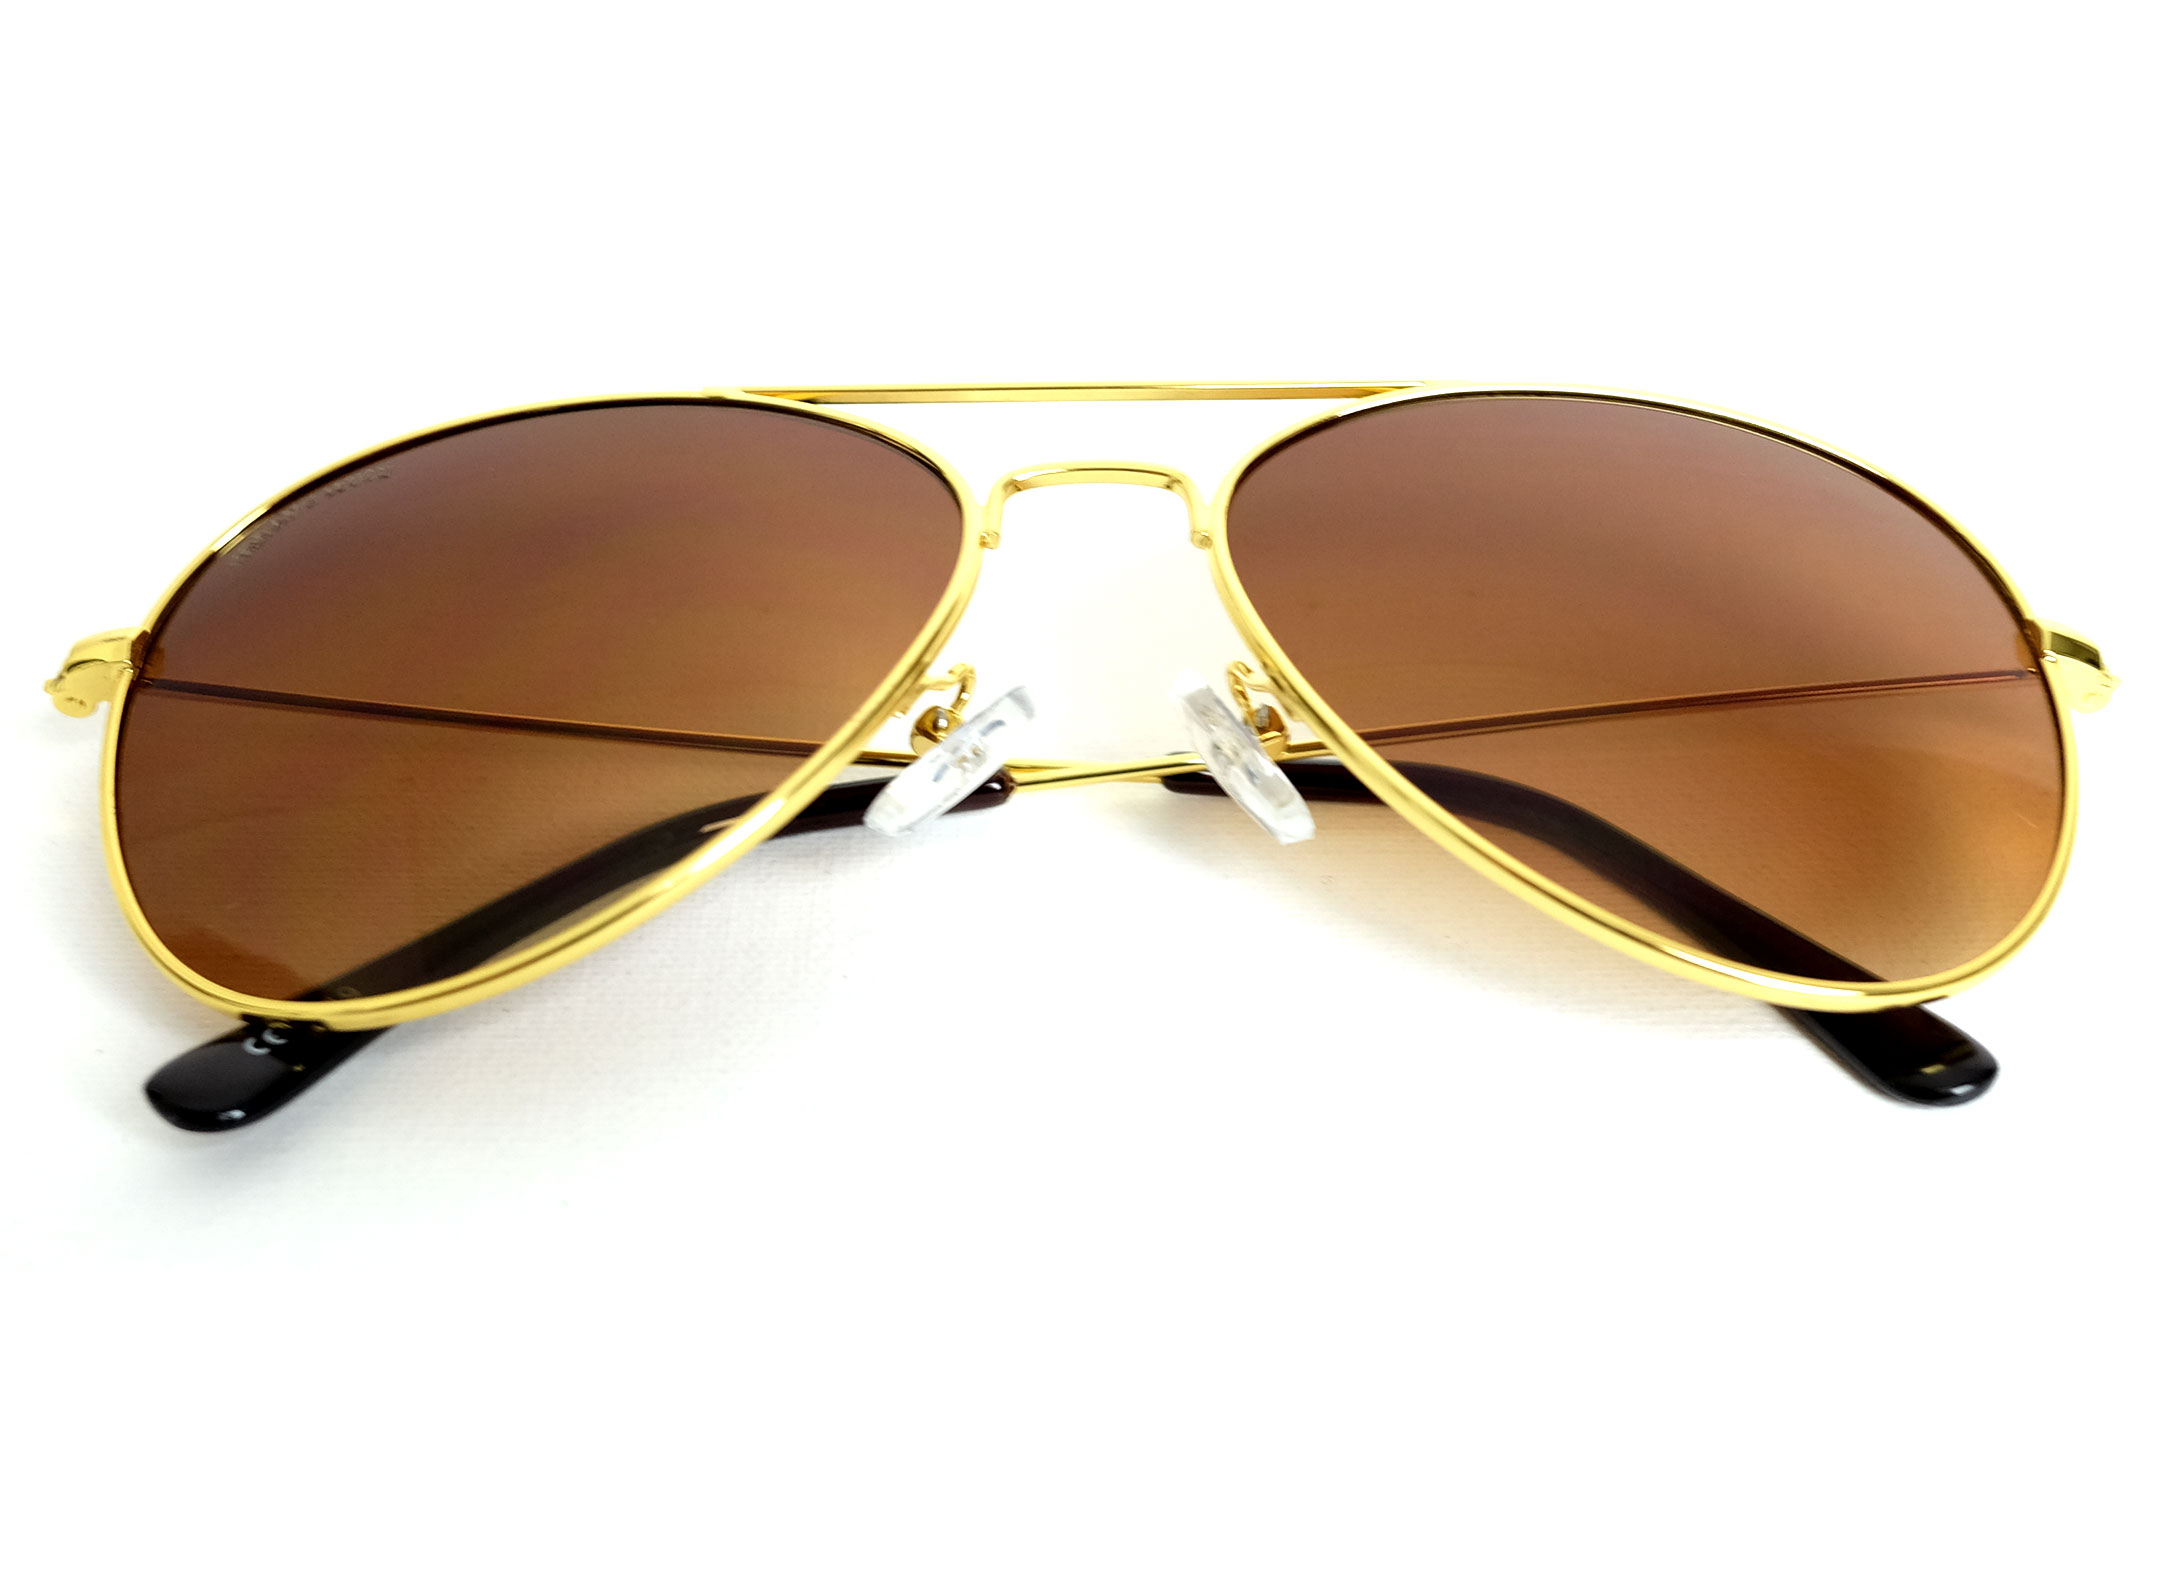 Aviator sunglasses in gold and brown